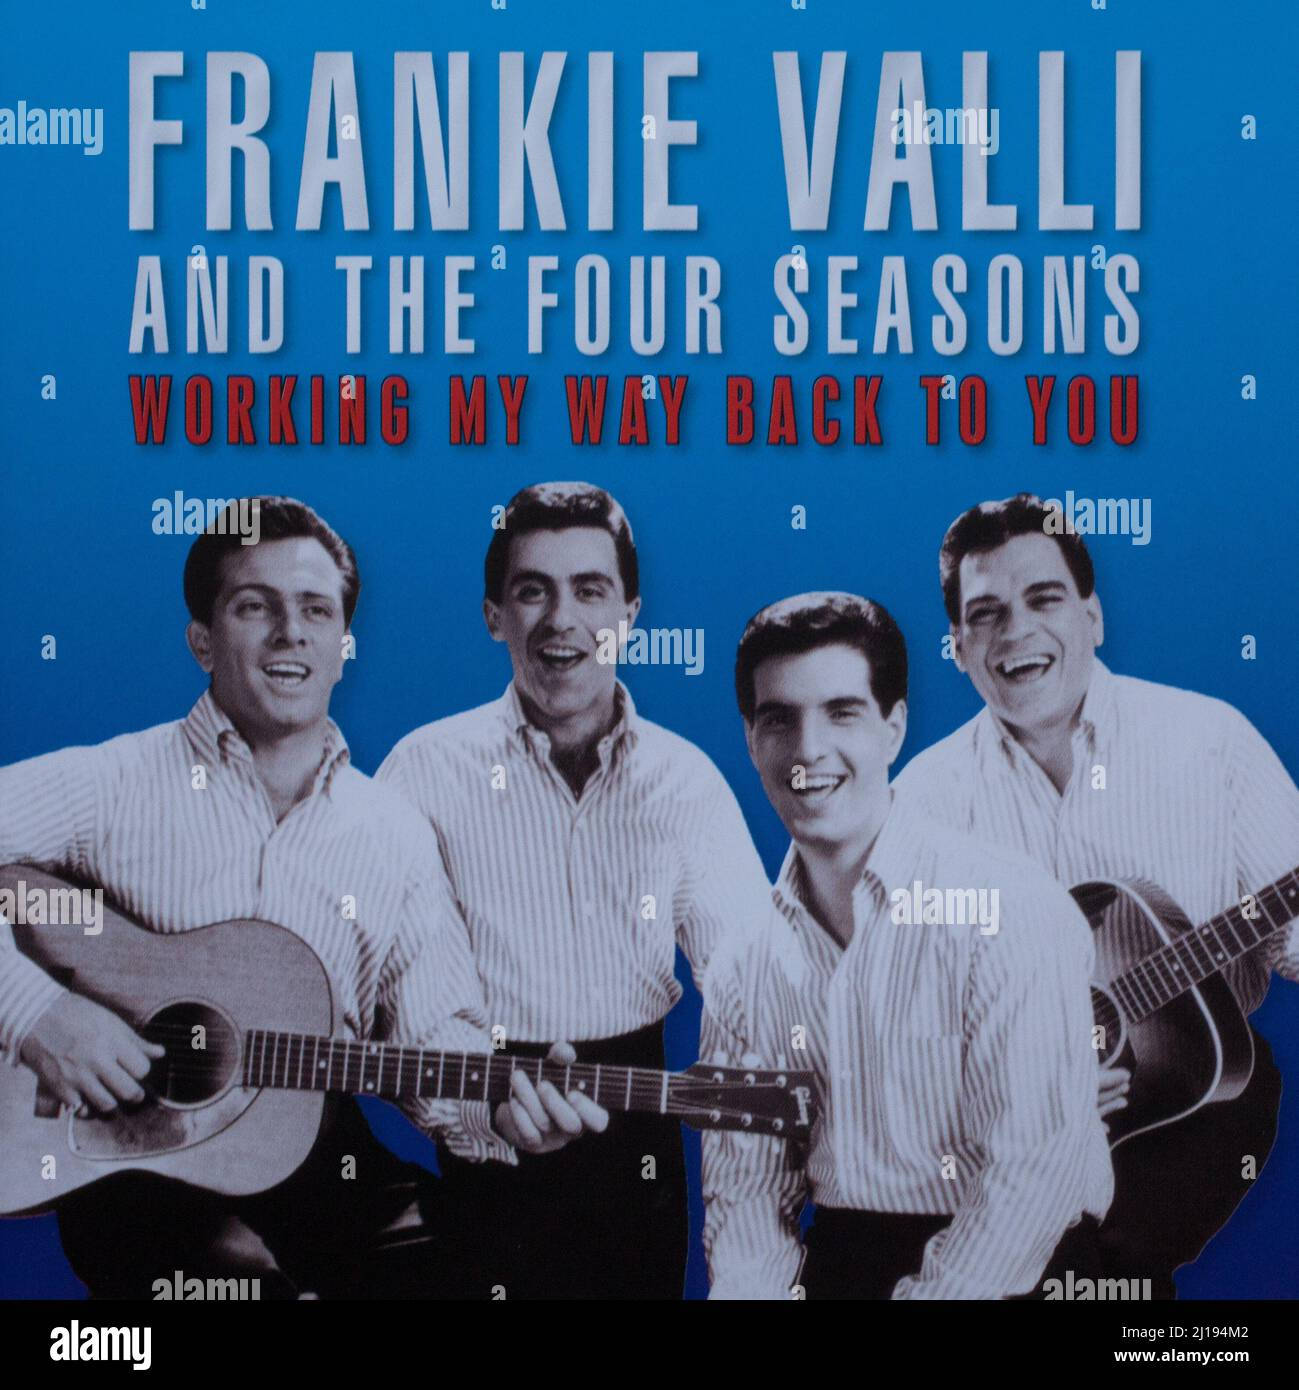 Working Way Frankie Valli And The Four Seasons Wallpaper